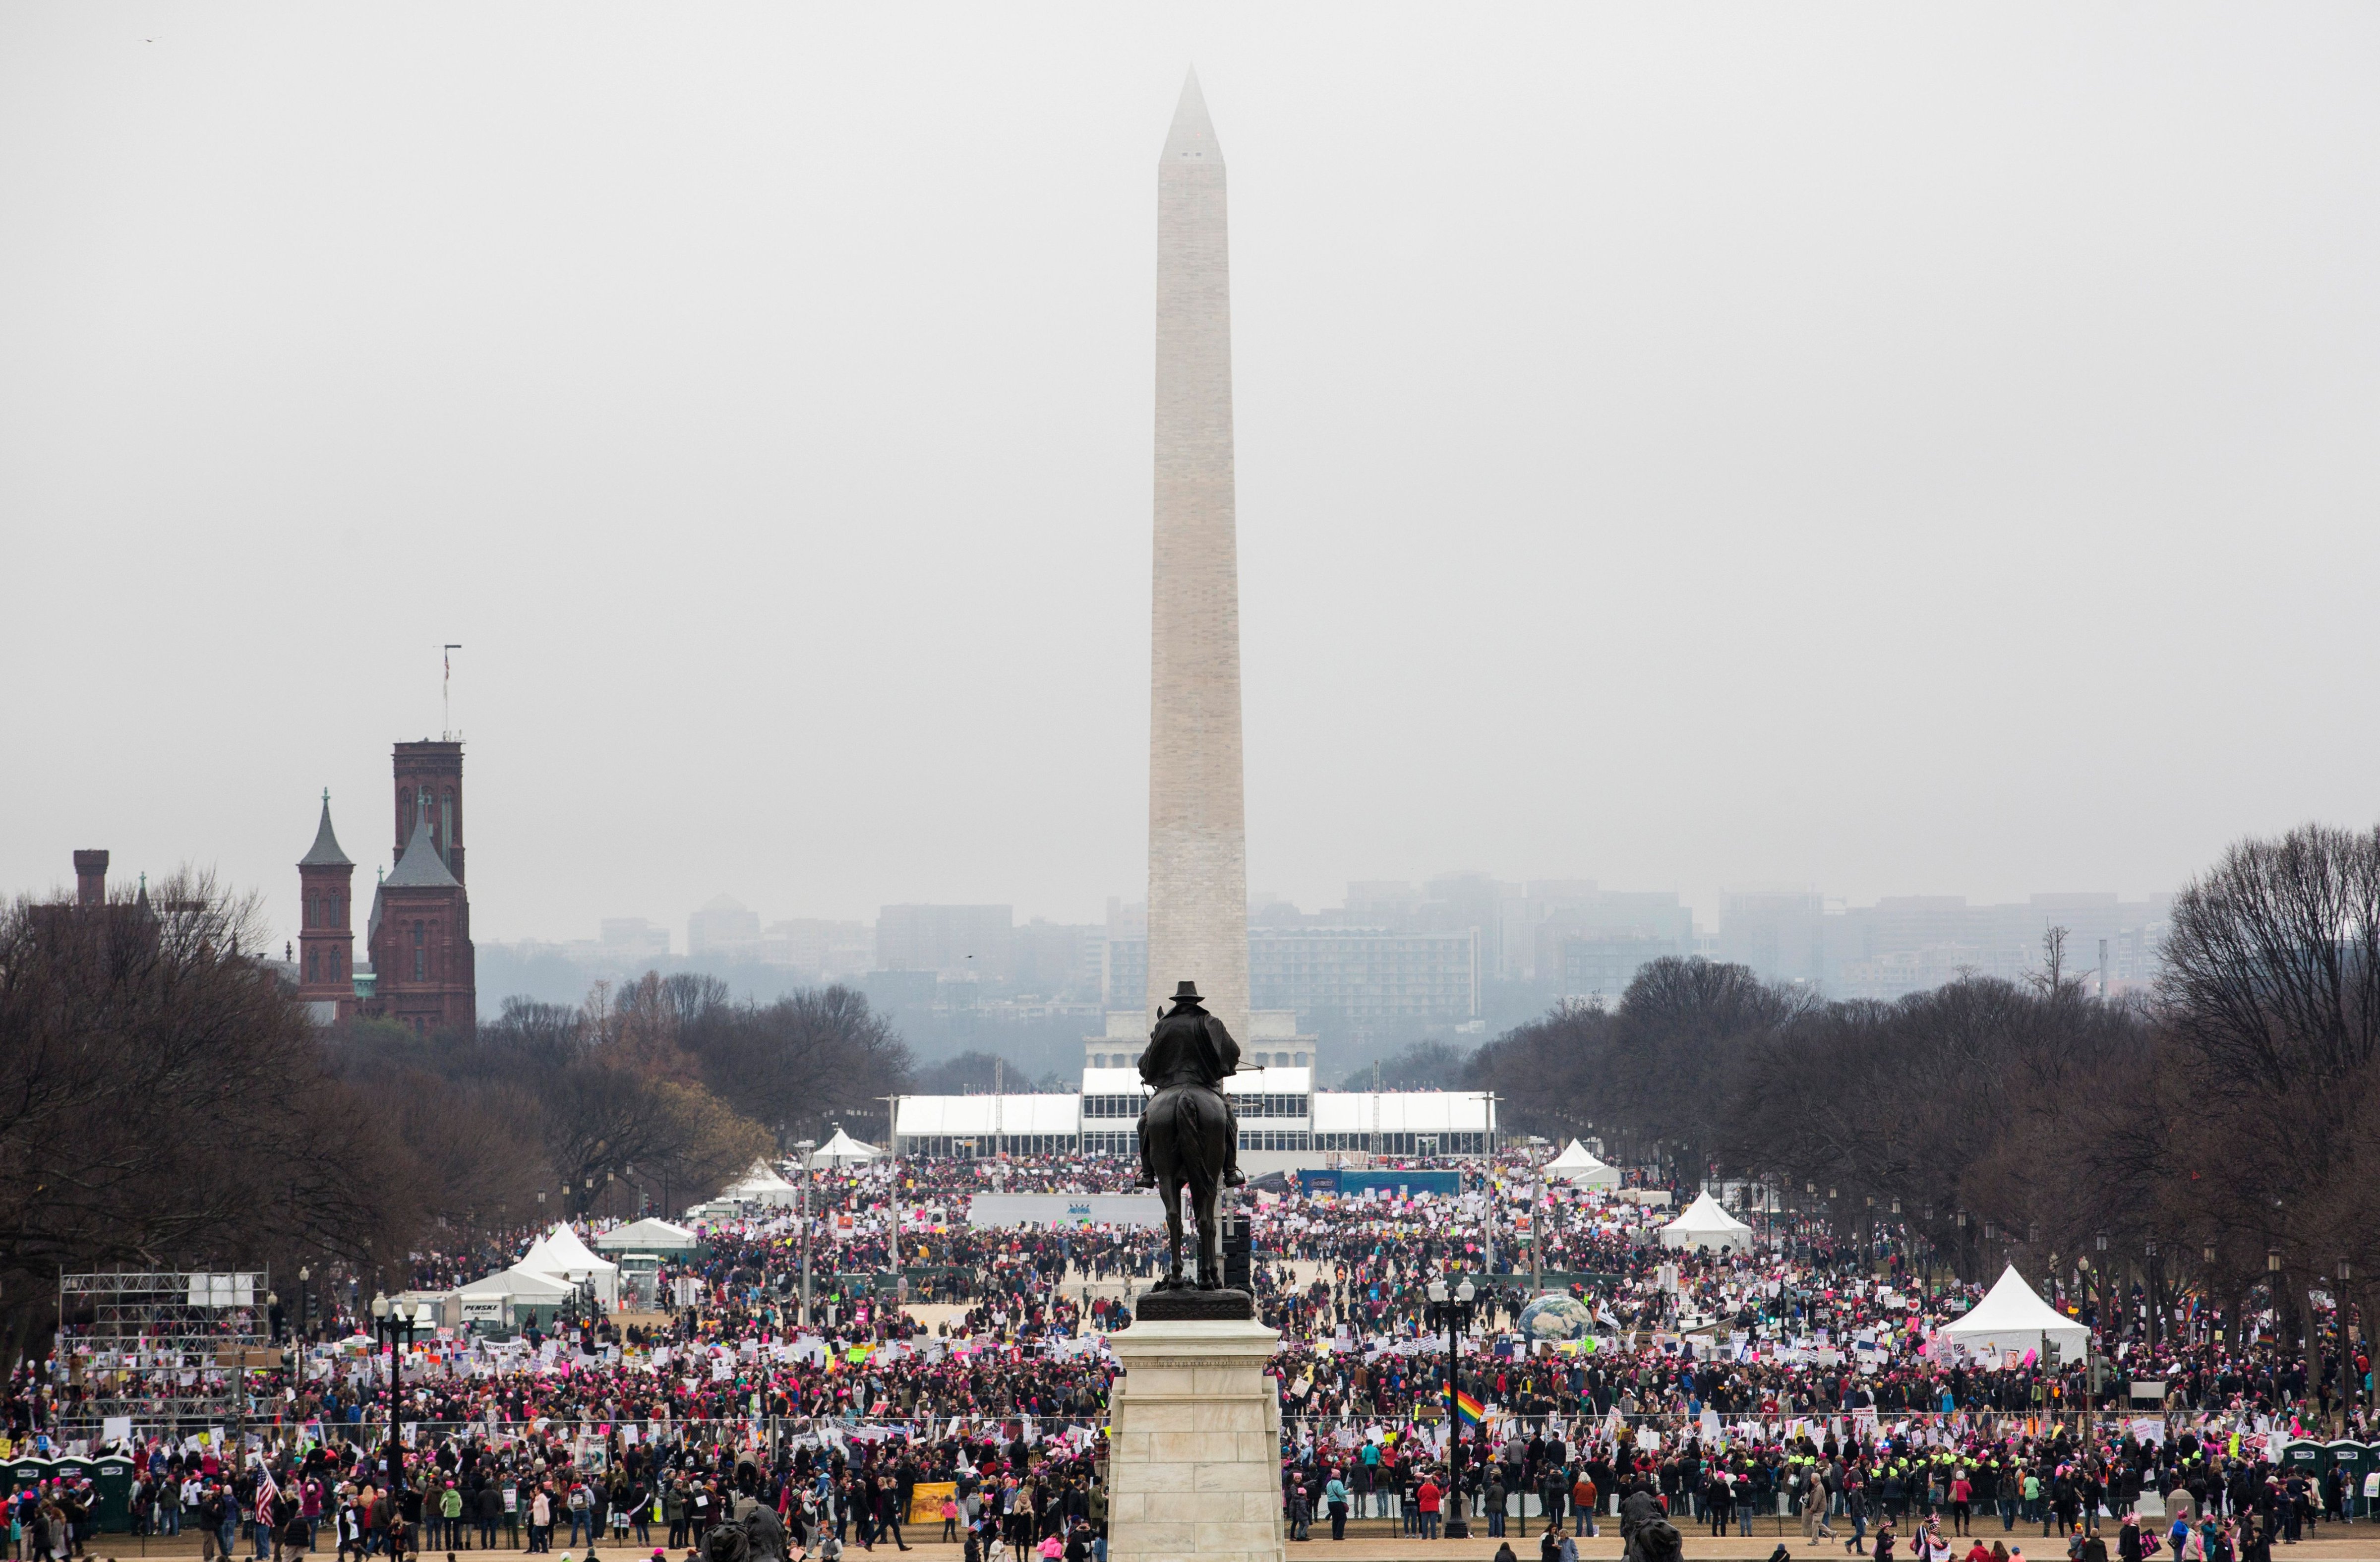 Protesters crowd the National Mall in Washington, D.C. during the Women's March on Jan. 21, 2017. (Zach Gibson—AFP/Getty Images)